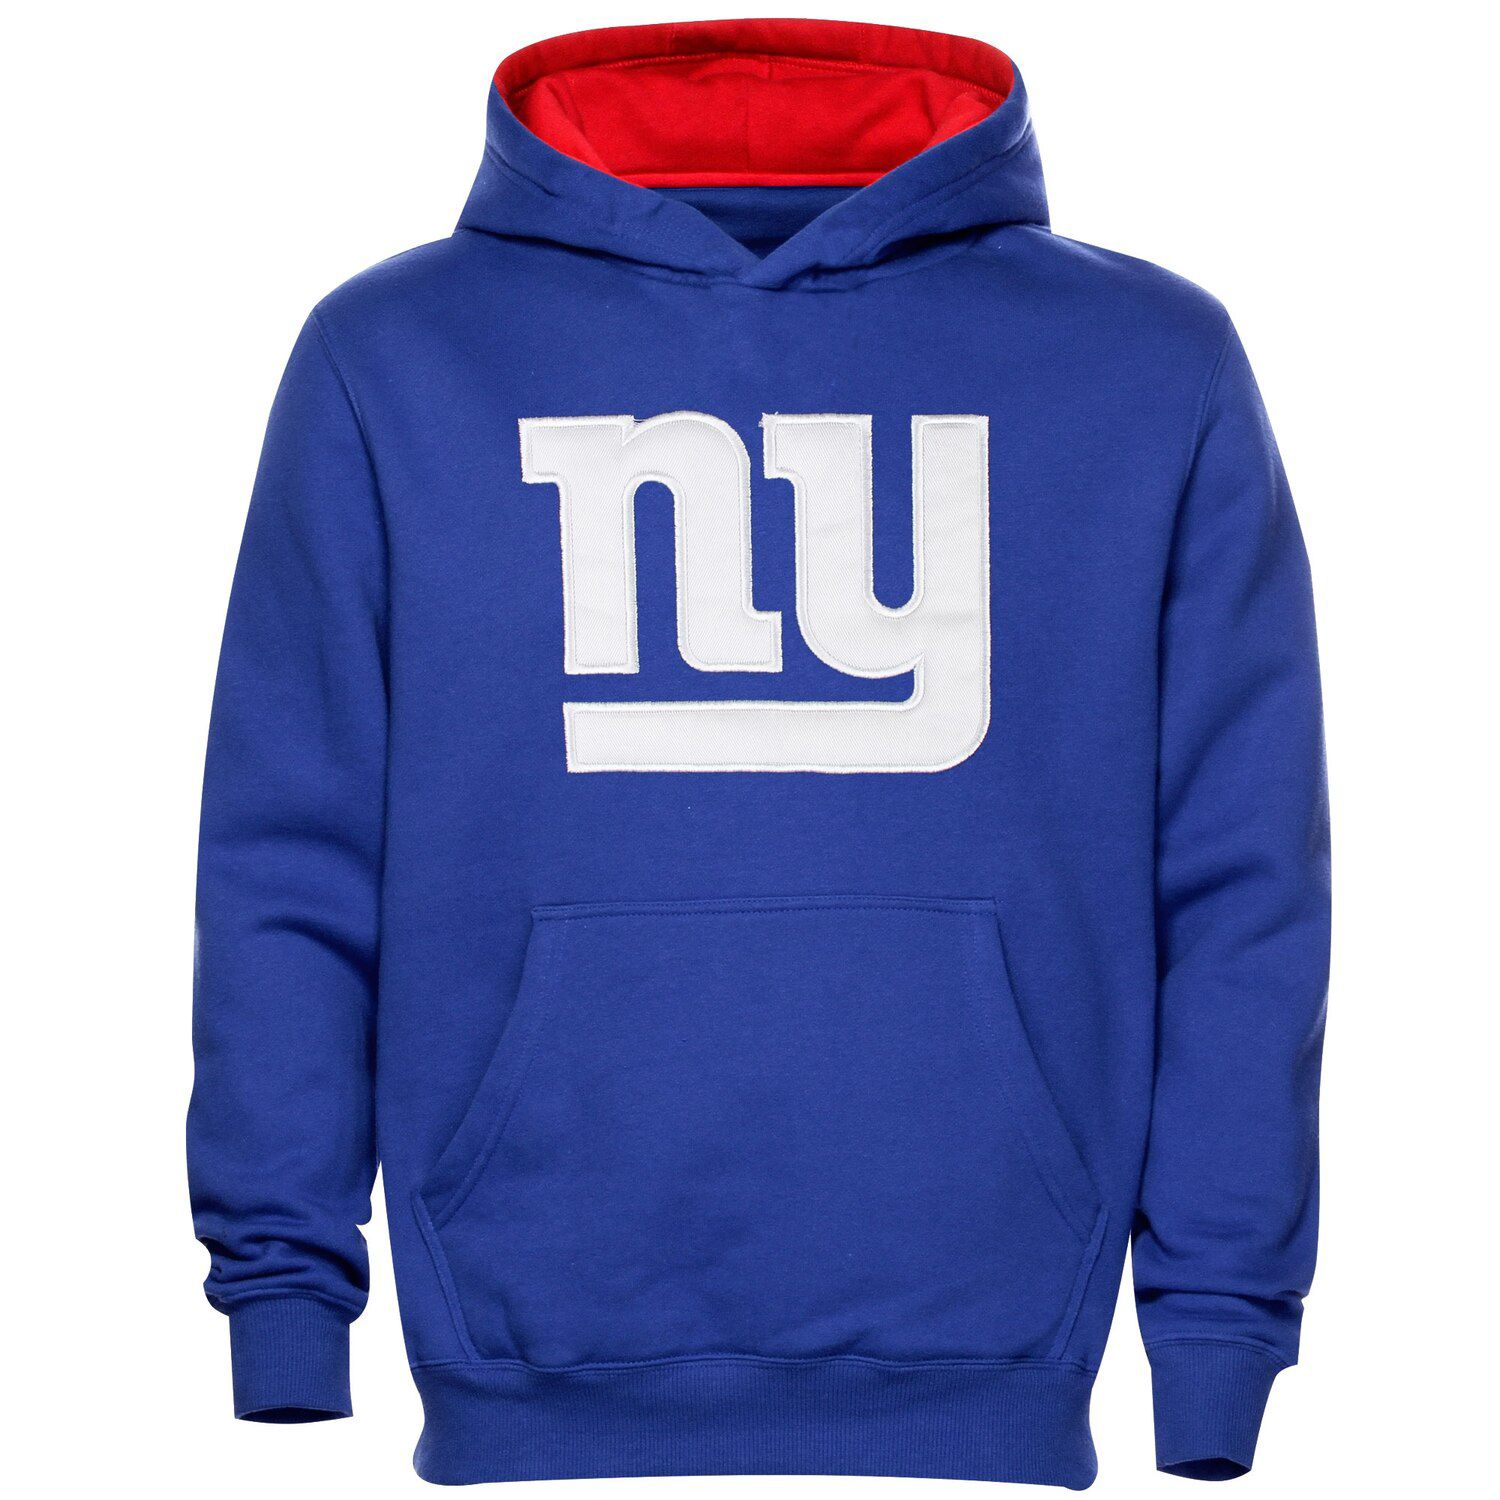 Primary Logo Pullover Hoodie - Royal Blue